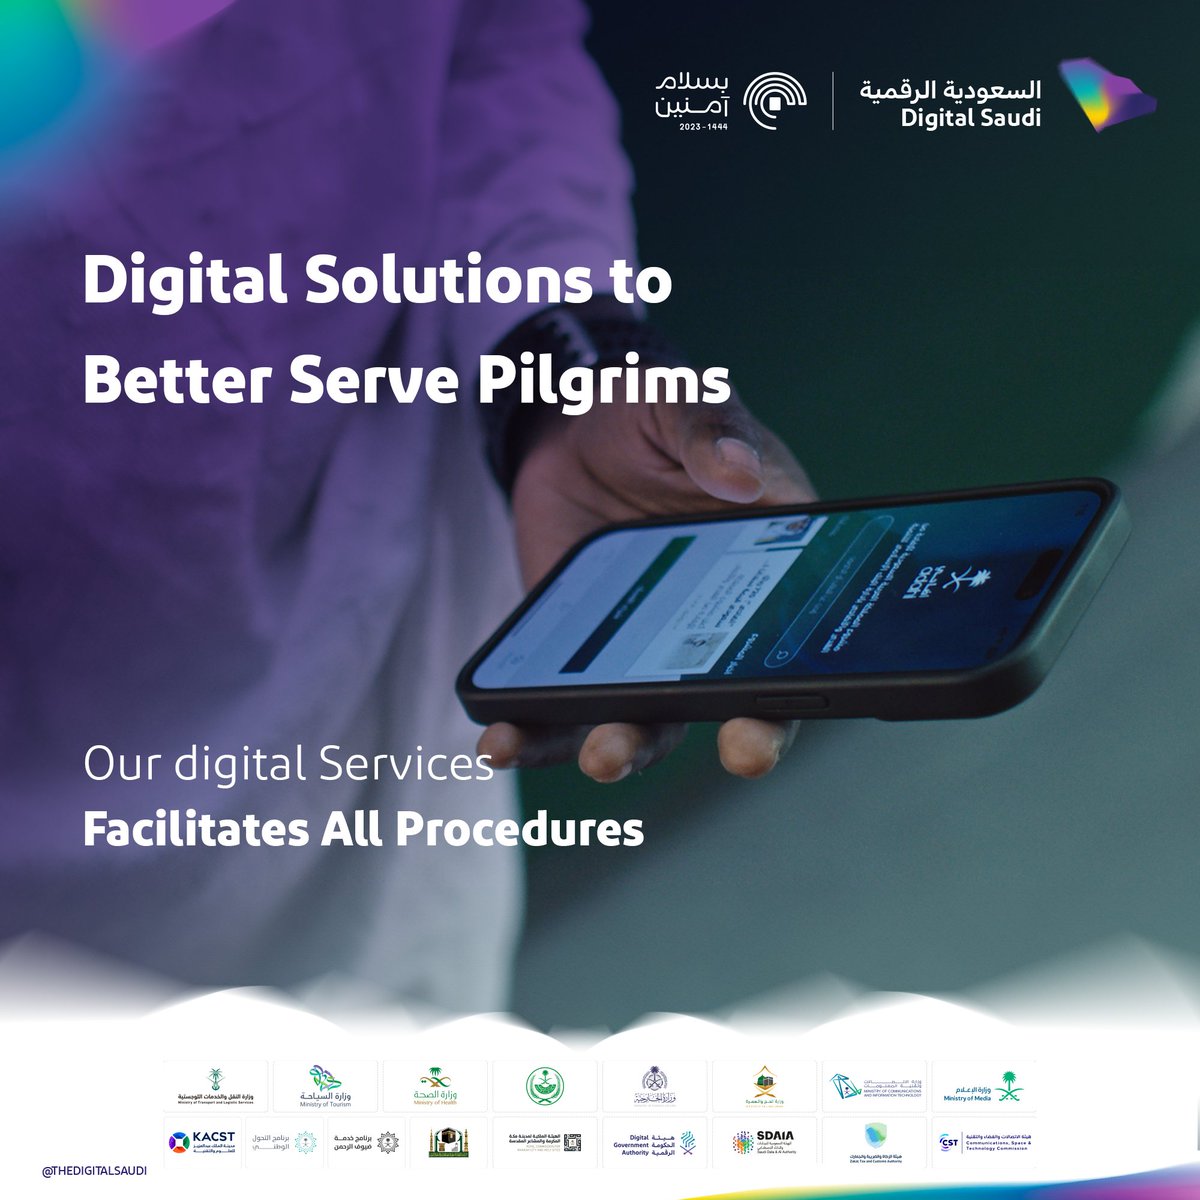 Our digital services encompass a wide range, including transportation, food and housing, as well as a guided companion service for pilgrims. These services #Facilitates_Procedures and make the pilgrimage journey easier and more convenient for pilgrims.
#In_Peace_and_Security